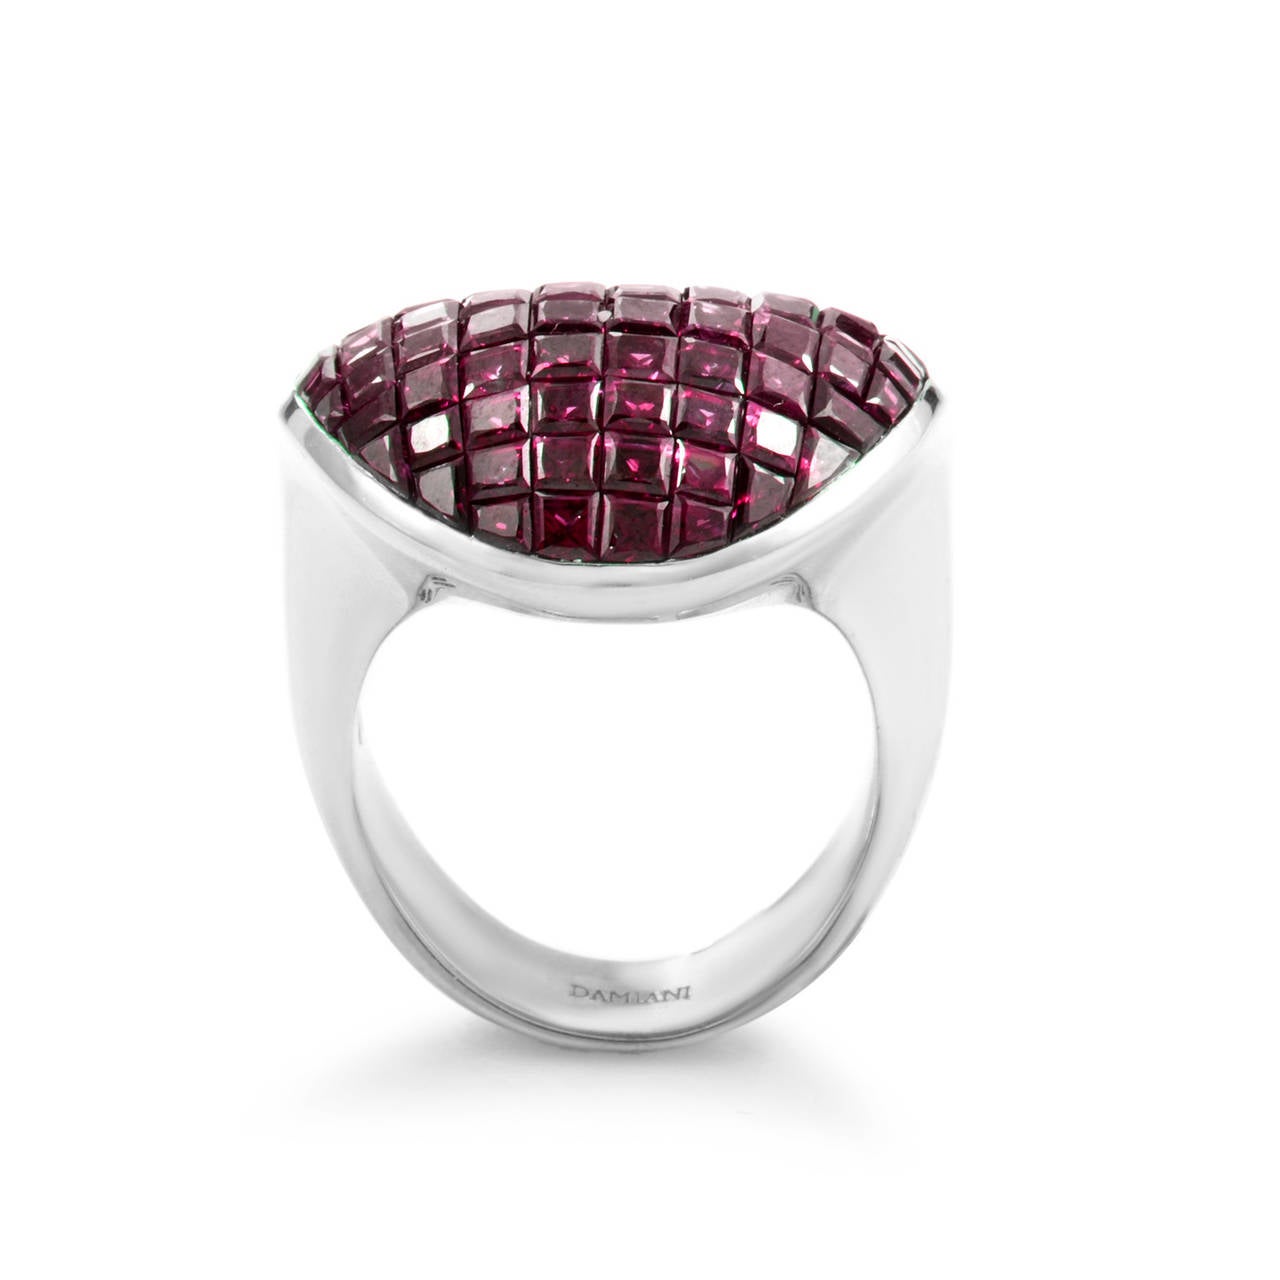 With its rather unconventional shape offering memorable offbeat look, this Damiani ring is a piece that will amaze everyone around you; that effect is enhanced by the eye-catching contrast of cool shimmer of 18K white gold and splendid warm nuance